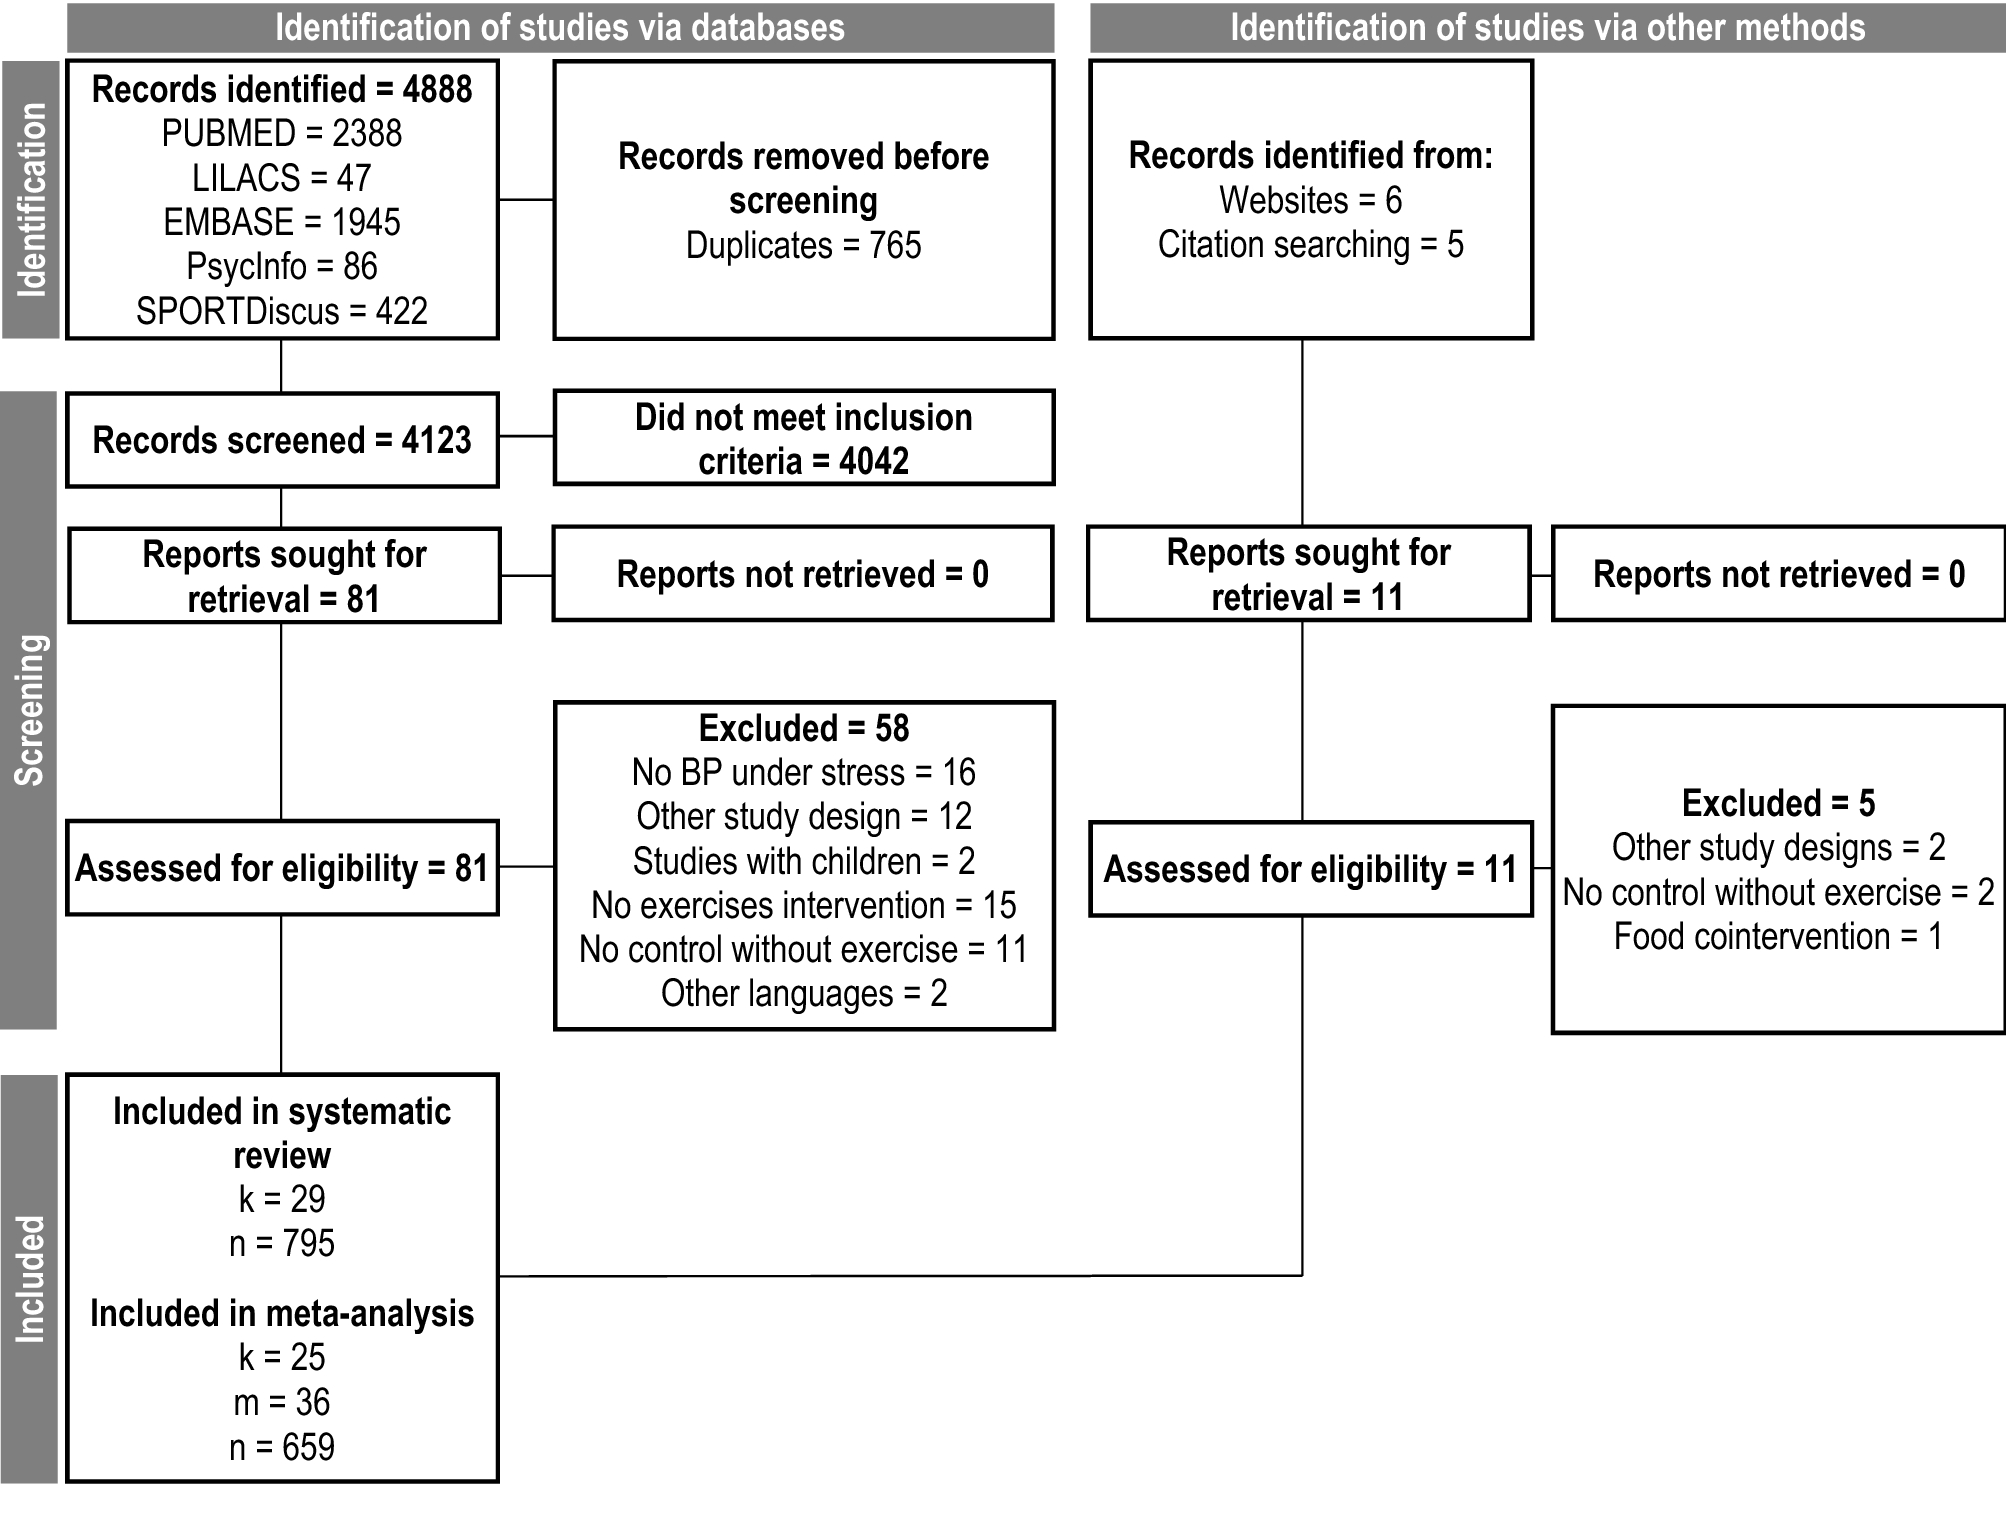 A single session of exercise reduces blood pressure reactivity to stress: a  systematic review and meta-analysis | Scientific Reports